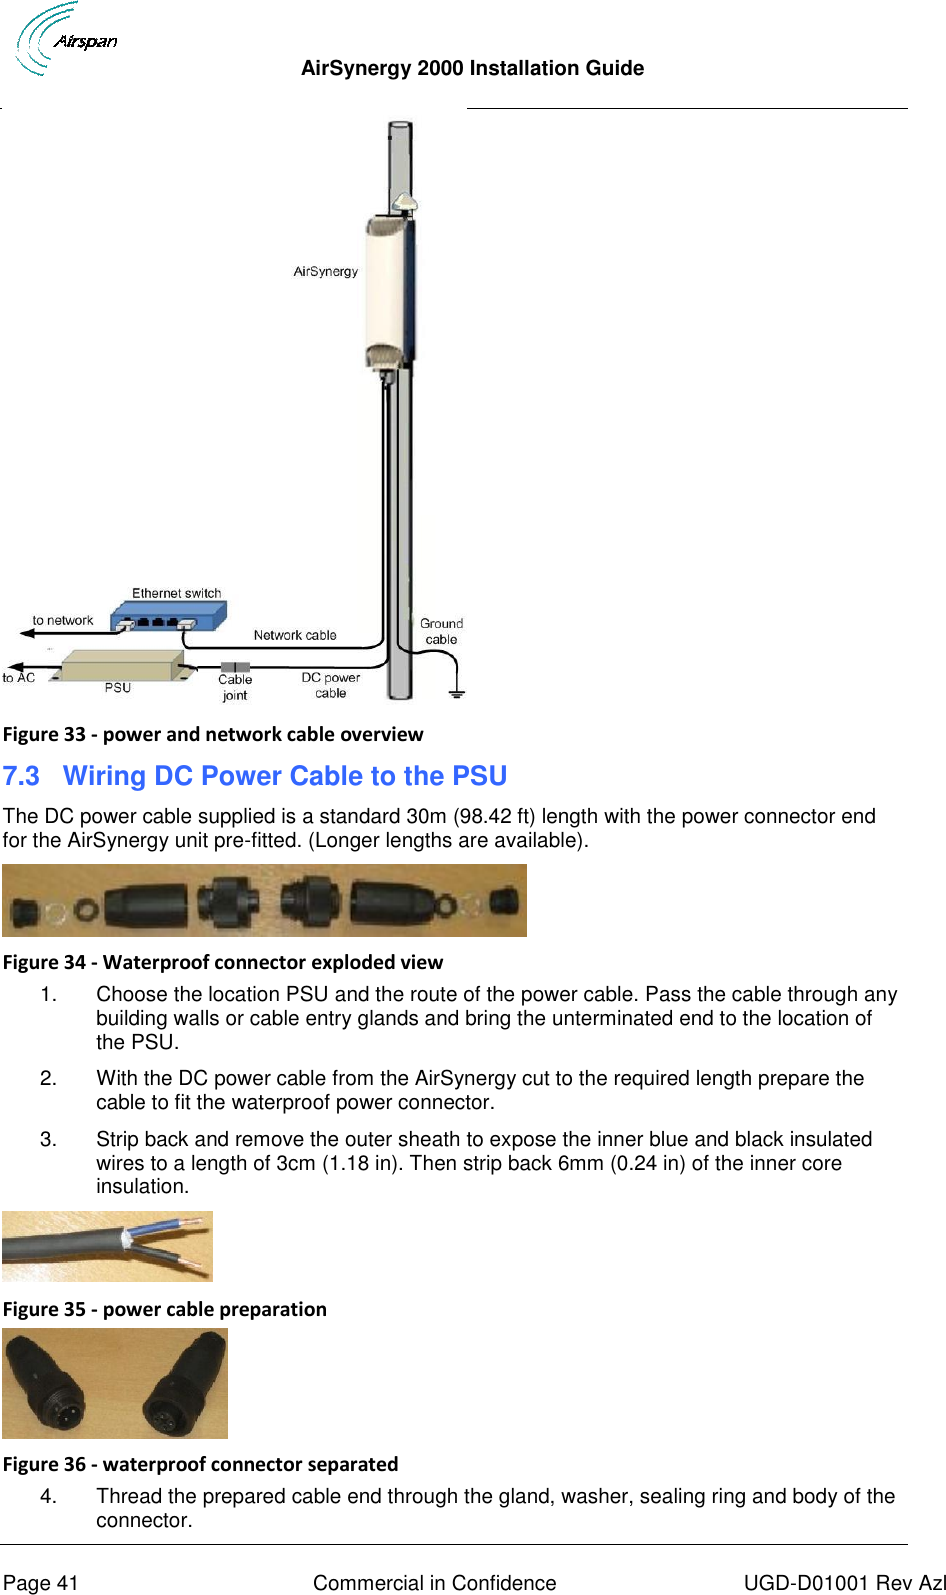  AirSynergy 2000 Installation Guide     Page 41  Commercial in Confidence  UGD-D01001 Rev Azl  Figure 33 - power and network cable overview 7.3 Wiring DC Power Cable to the PSU The DC power cable supplied is a standard 30m (98.42 ft) length with the power connector end for the AirSynergy unit pre-fitted. (Longer lengths are available).   Figure 34 - Waterproof connector exploded view 1.  Choose the location PSU and the route of the power cable. Pass the cable through any building walls or cable entry glands and bring the unterminated end to the location of the PSU. 2.  With the DC power cable from the AirSynergy cut to the required length prepare the cable to fit the waterproof power connector.  3.  Strip back and remove the outer sheath to expose the inner blue and black insulated wires to a length of 3cm (1.18 in). Then strip back 6mm (0.24 in) of the inner core insulation.  Figure 35 - power cable preparation  Figure 36 - waterproof connector separated 4.  Thread the prepared cable end through the gland, washer, sealing ring and body of the connector. 